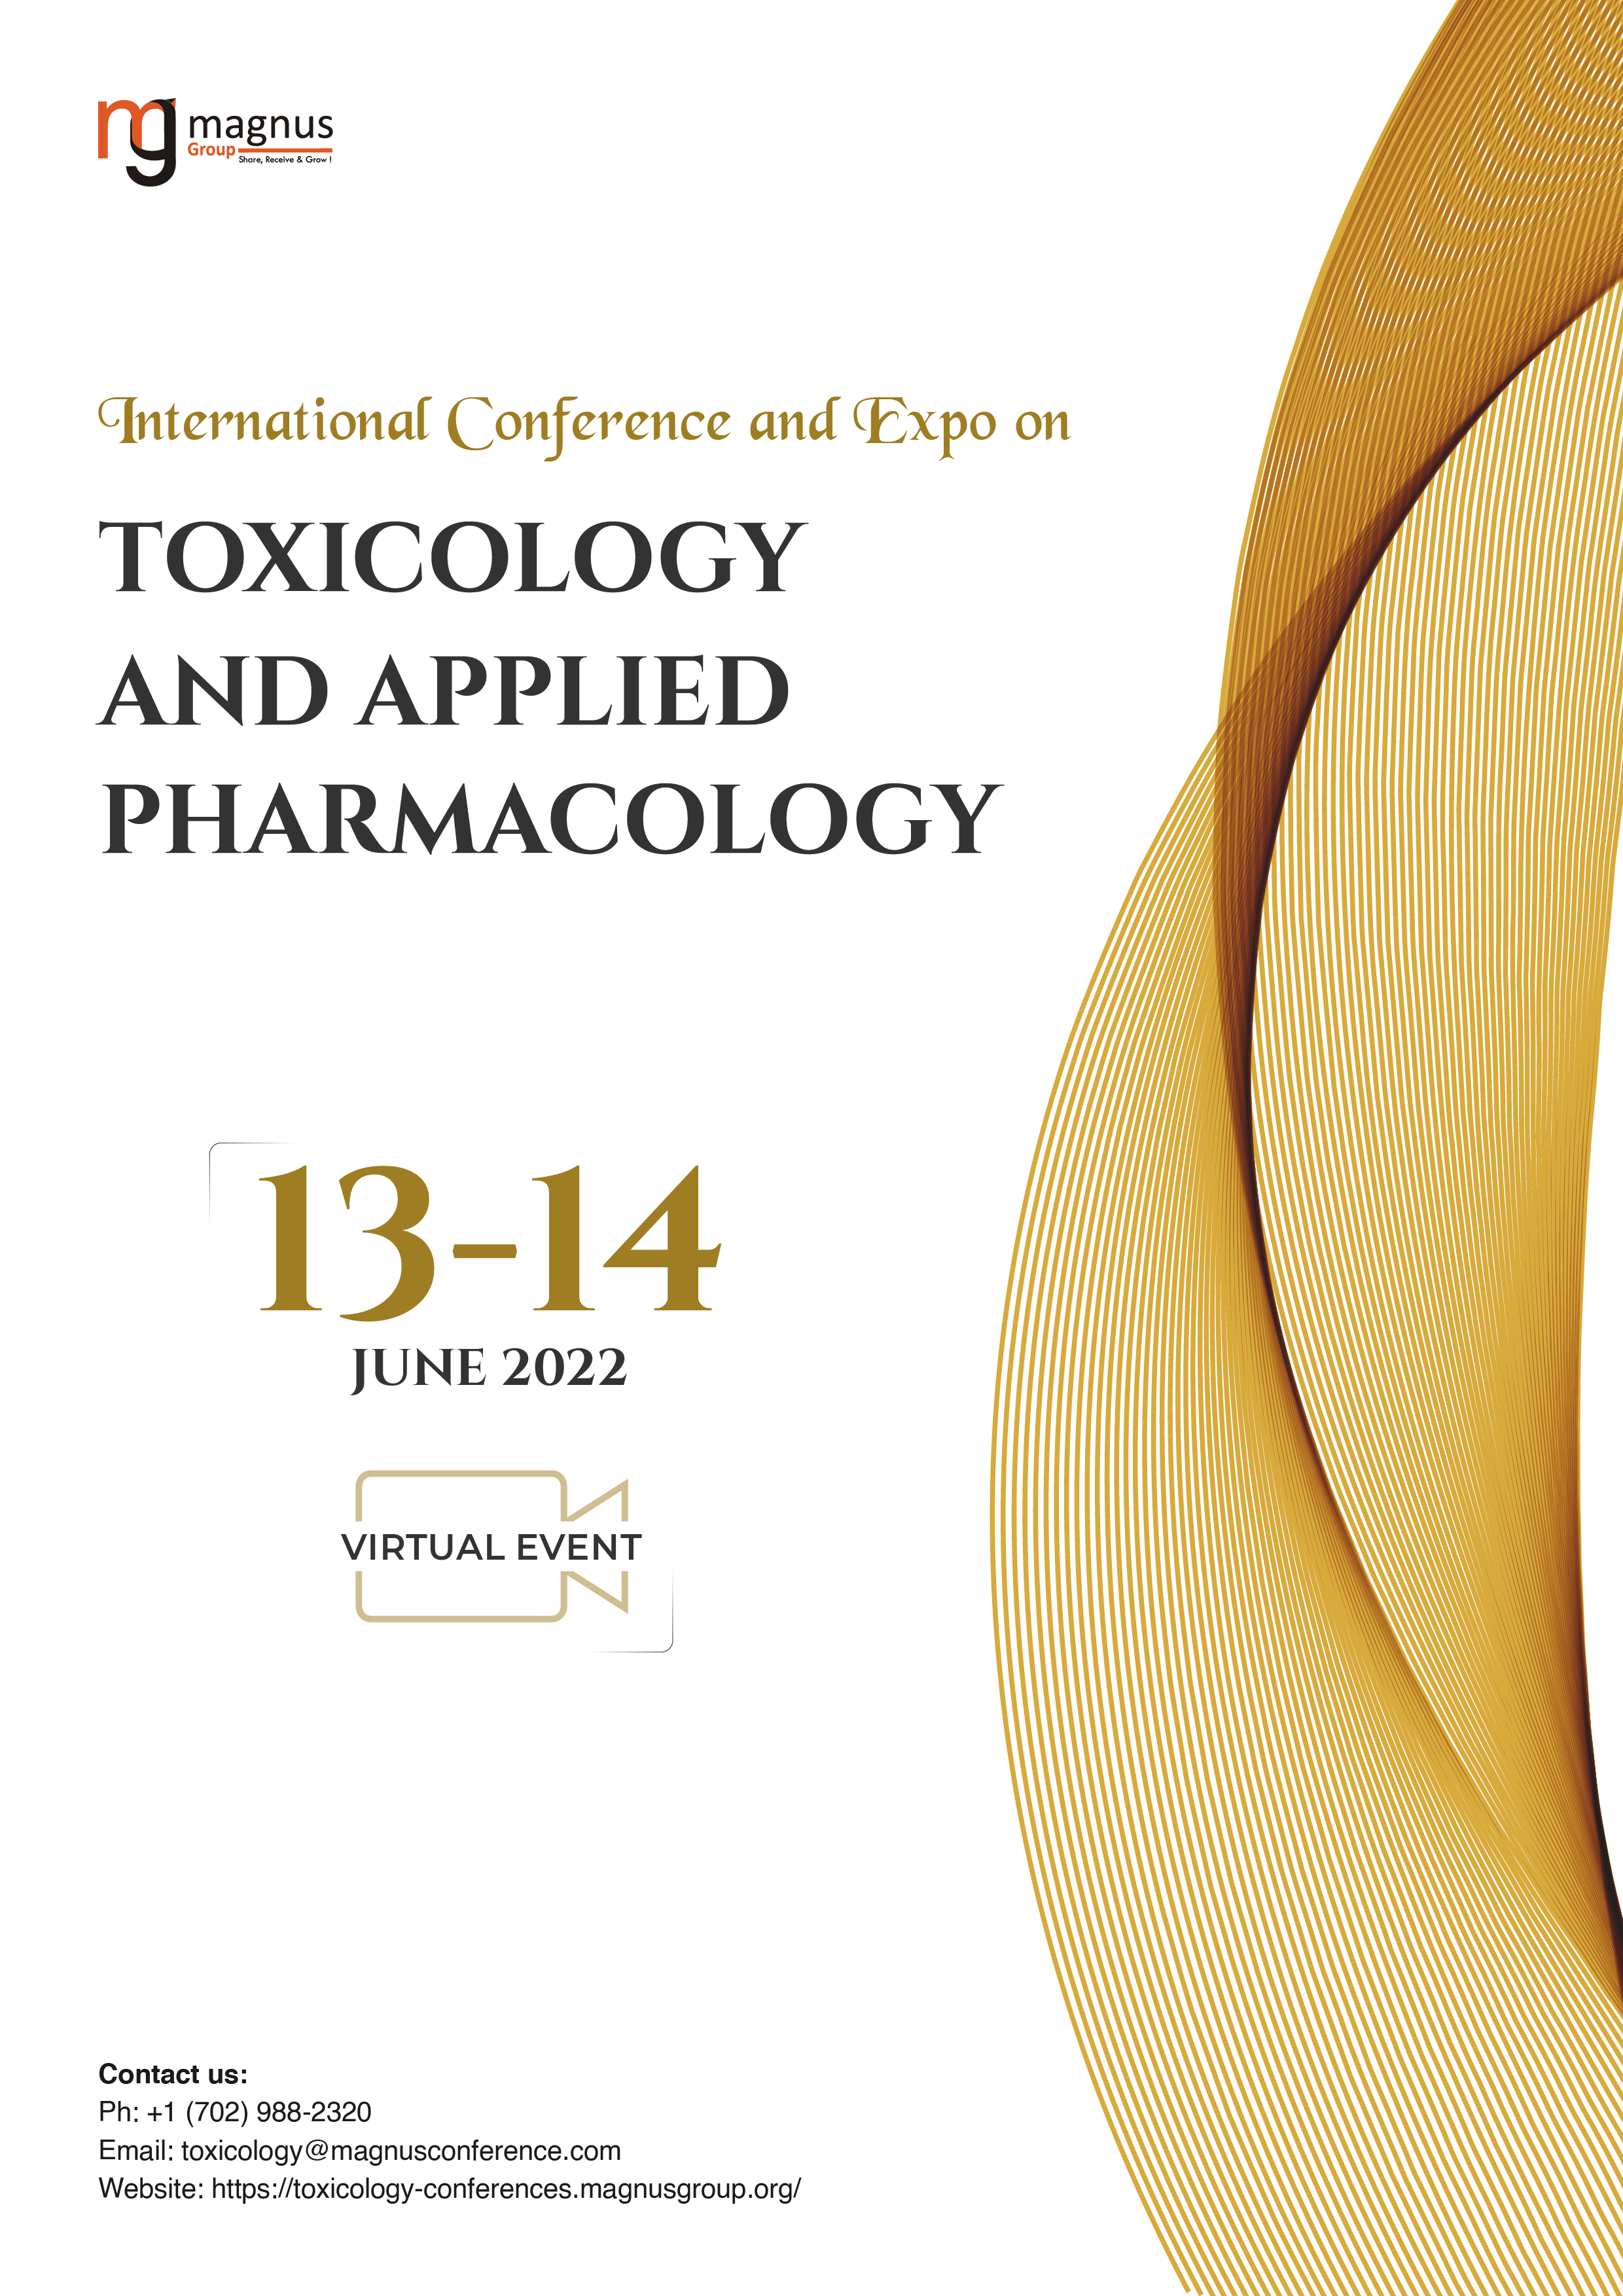 International Conference and Expo on Toxicology and Applied Pharmacology Conference  | Online Event Program